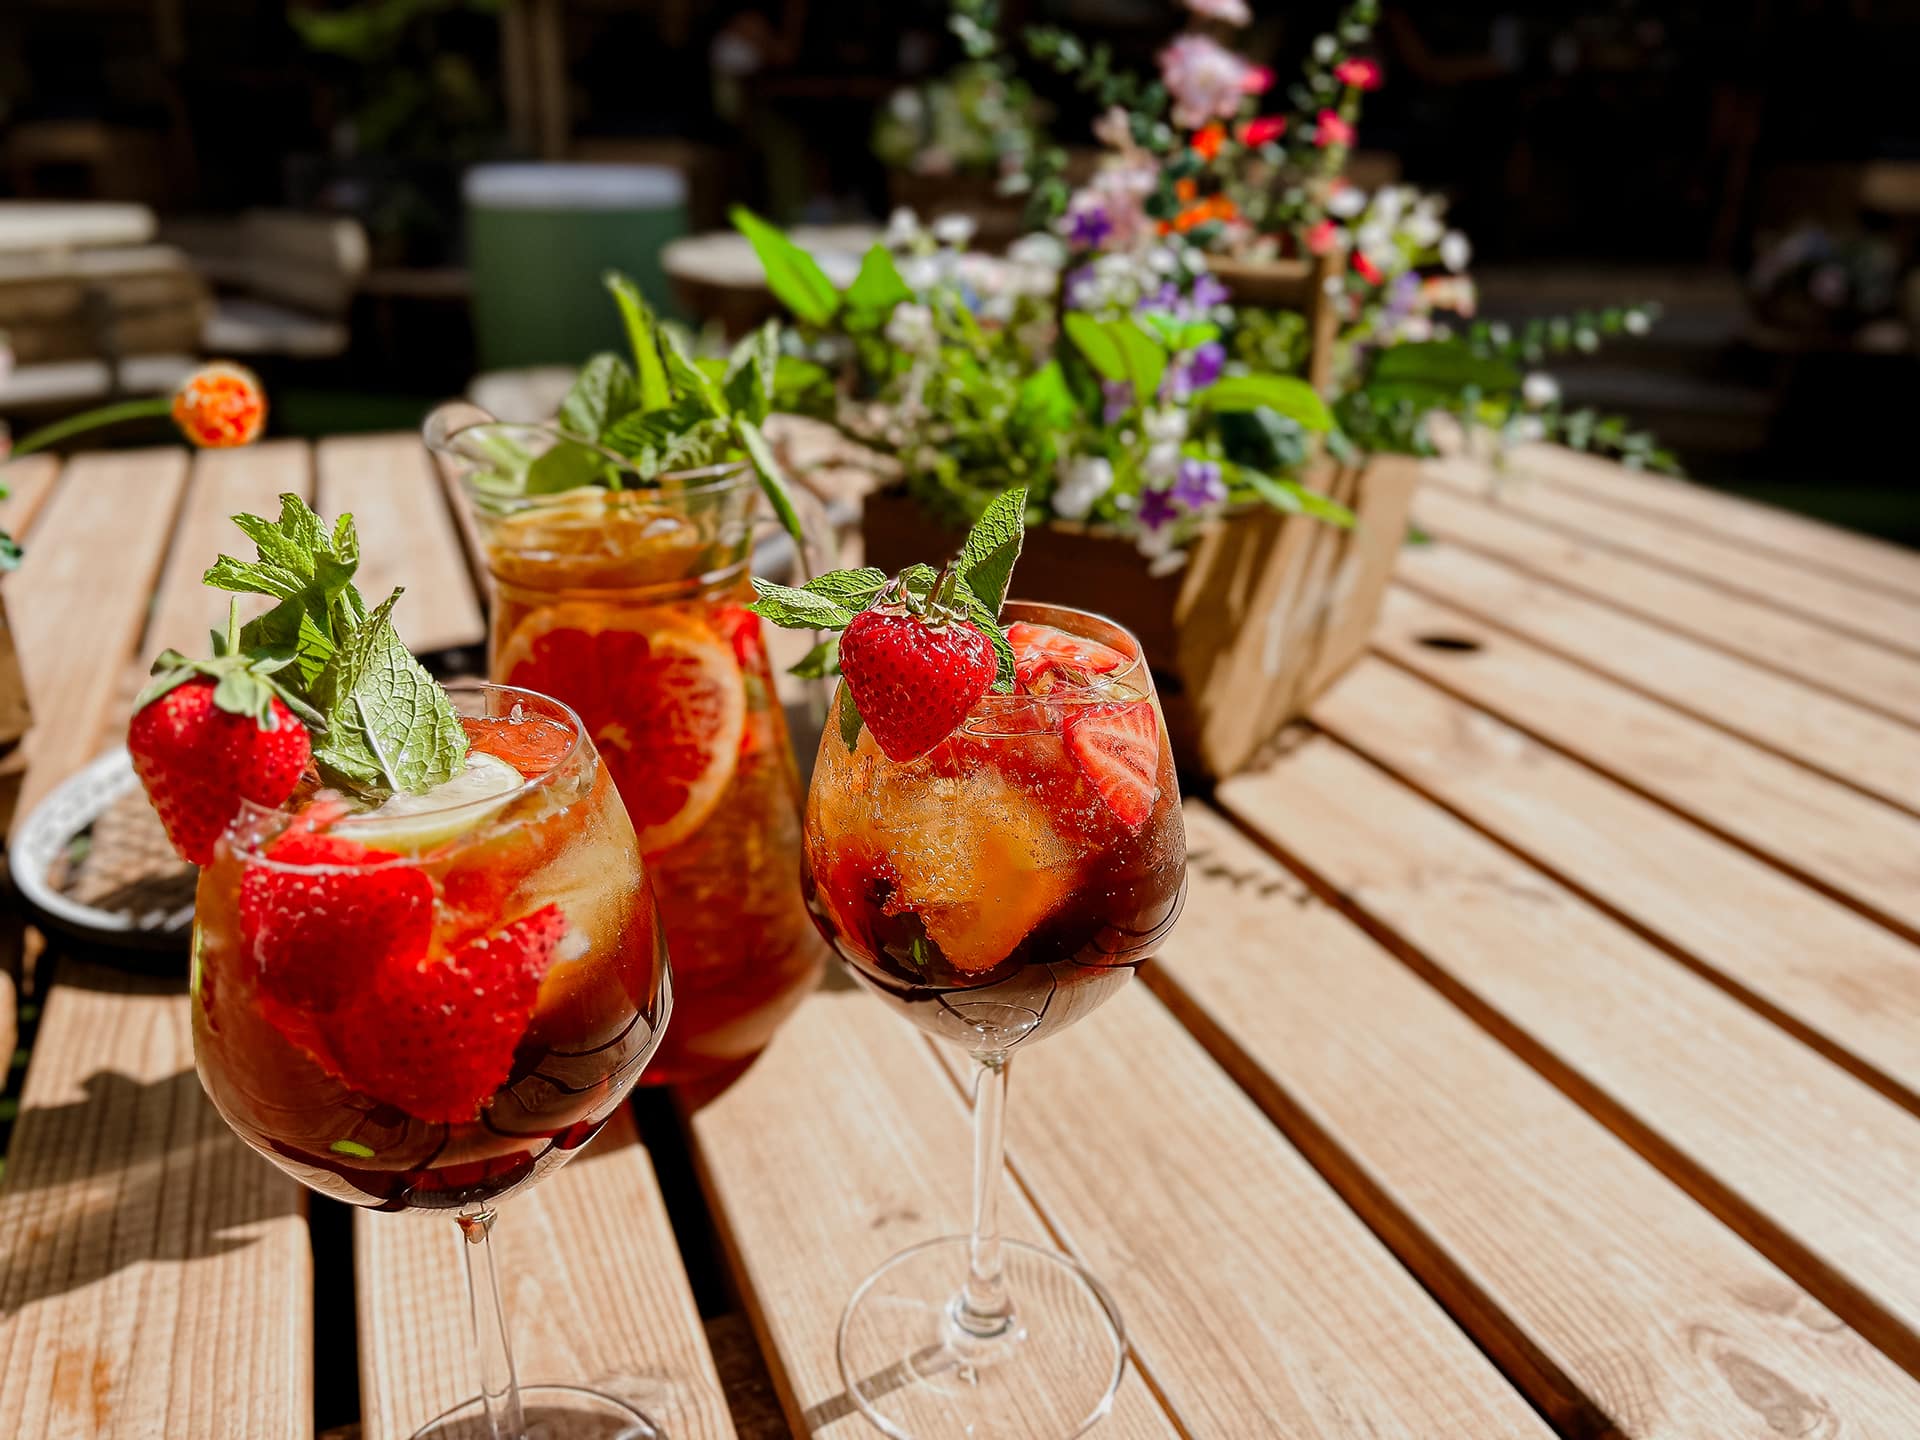 pimms-wine-glasses-outdoor-table